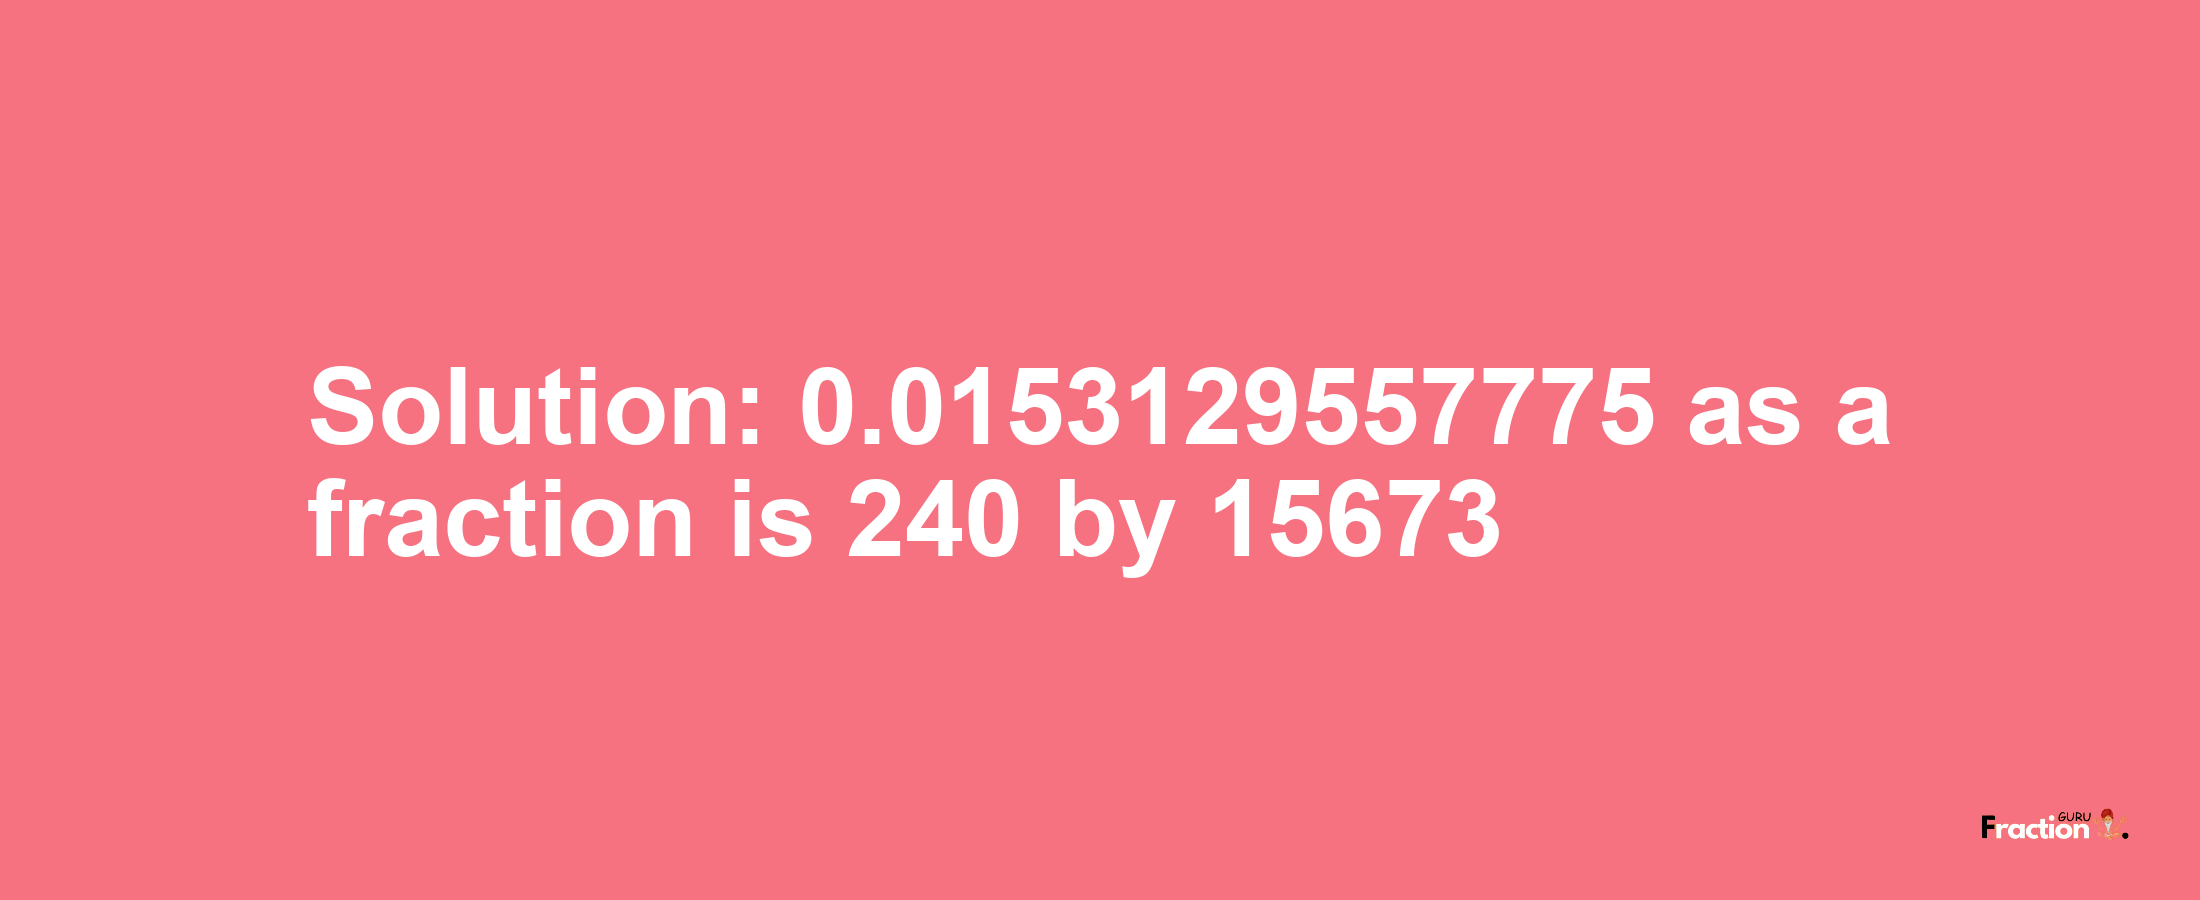 Solution:0.0153129557775 as a fraction is 240/15673